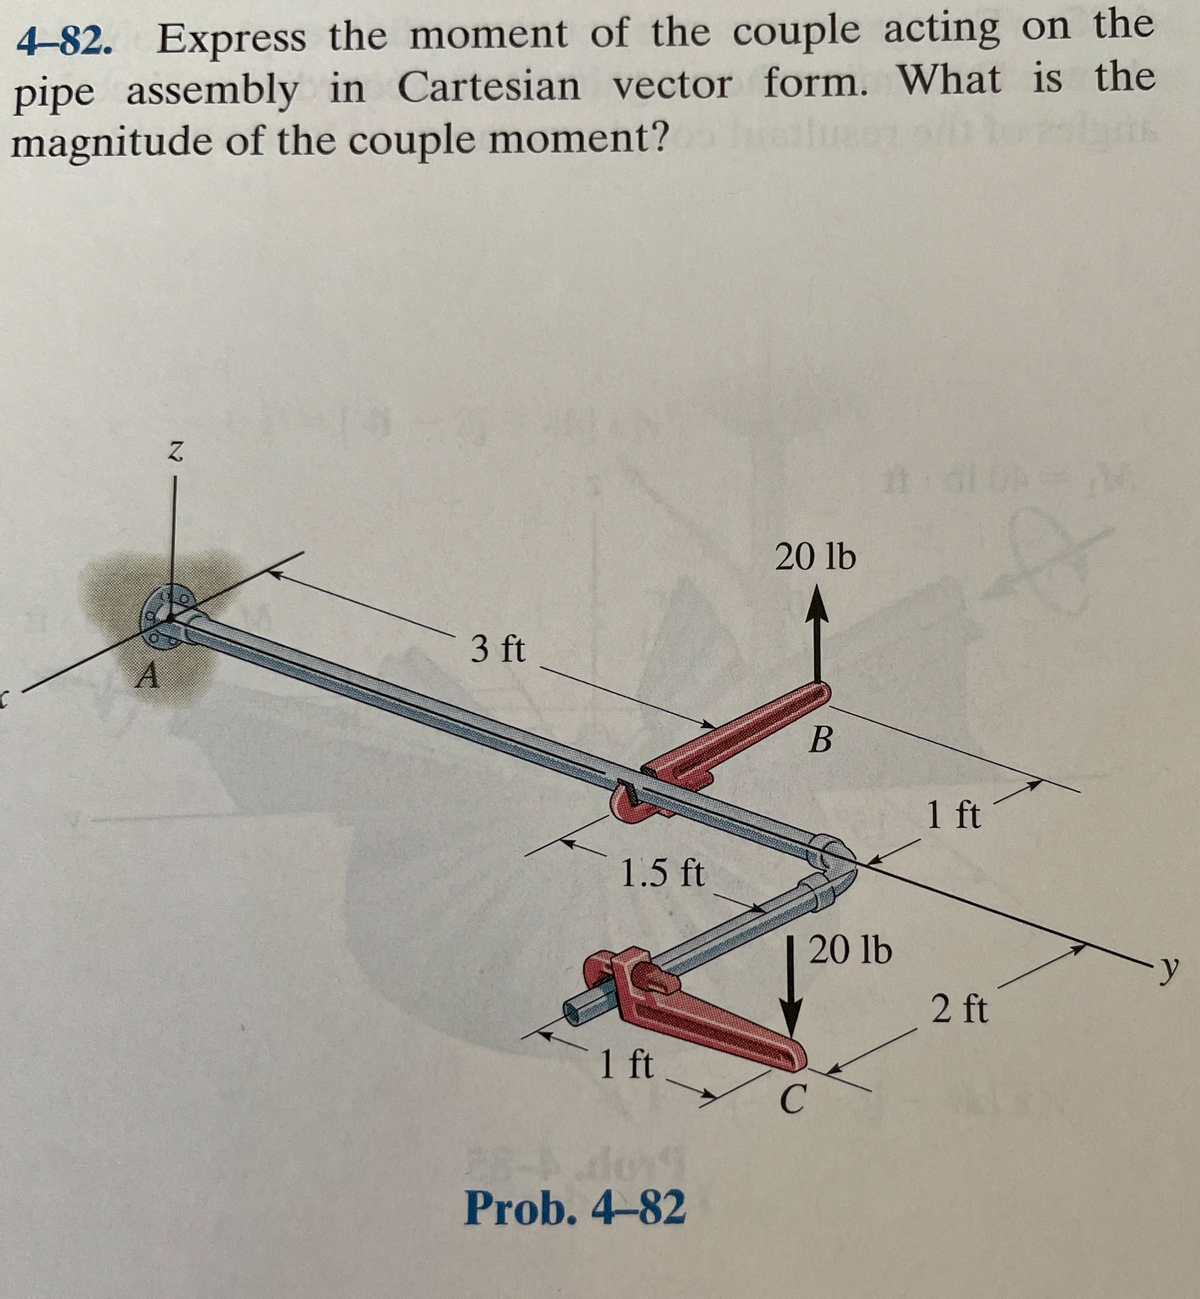 4-82. Express the moment of the couple acting on the
pipe assembly in Cartesian vector form. What is the
magnitude of the couple moment?
n di M
20 lb
3 ft
В
1 ft
1.5 ft
20 lb
2 ft
1 ft
28-Ado19
Prob. 4-82
